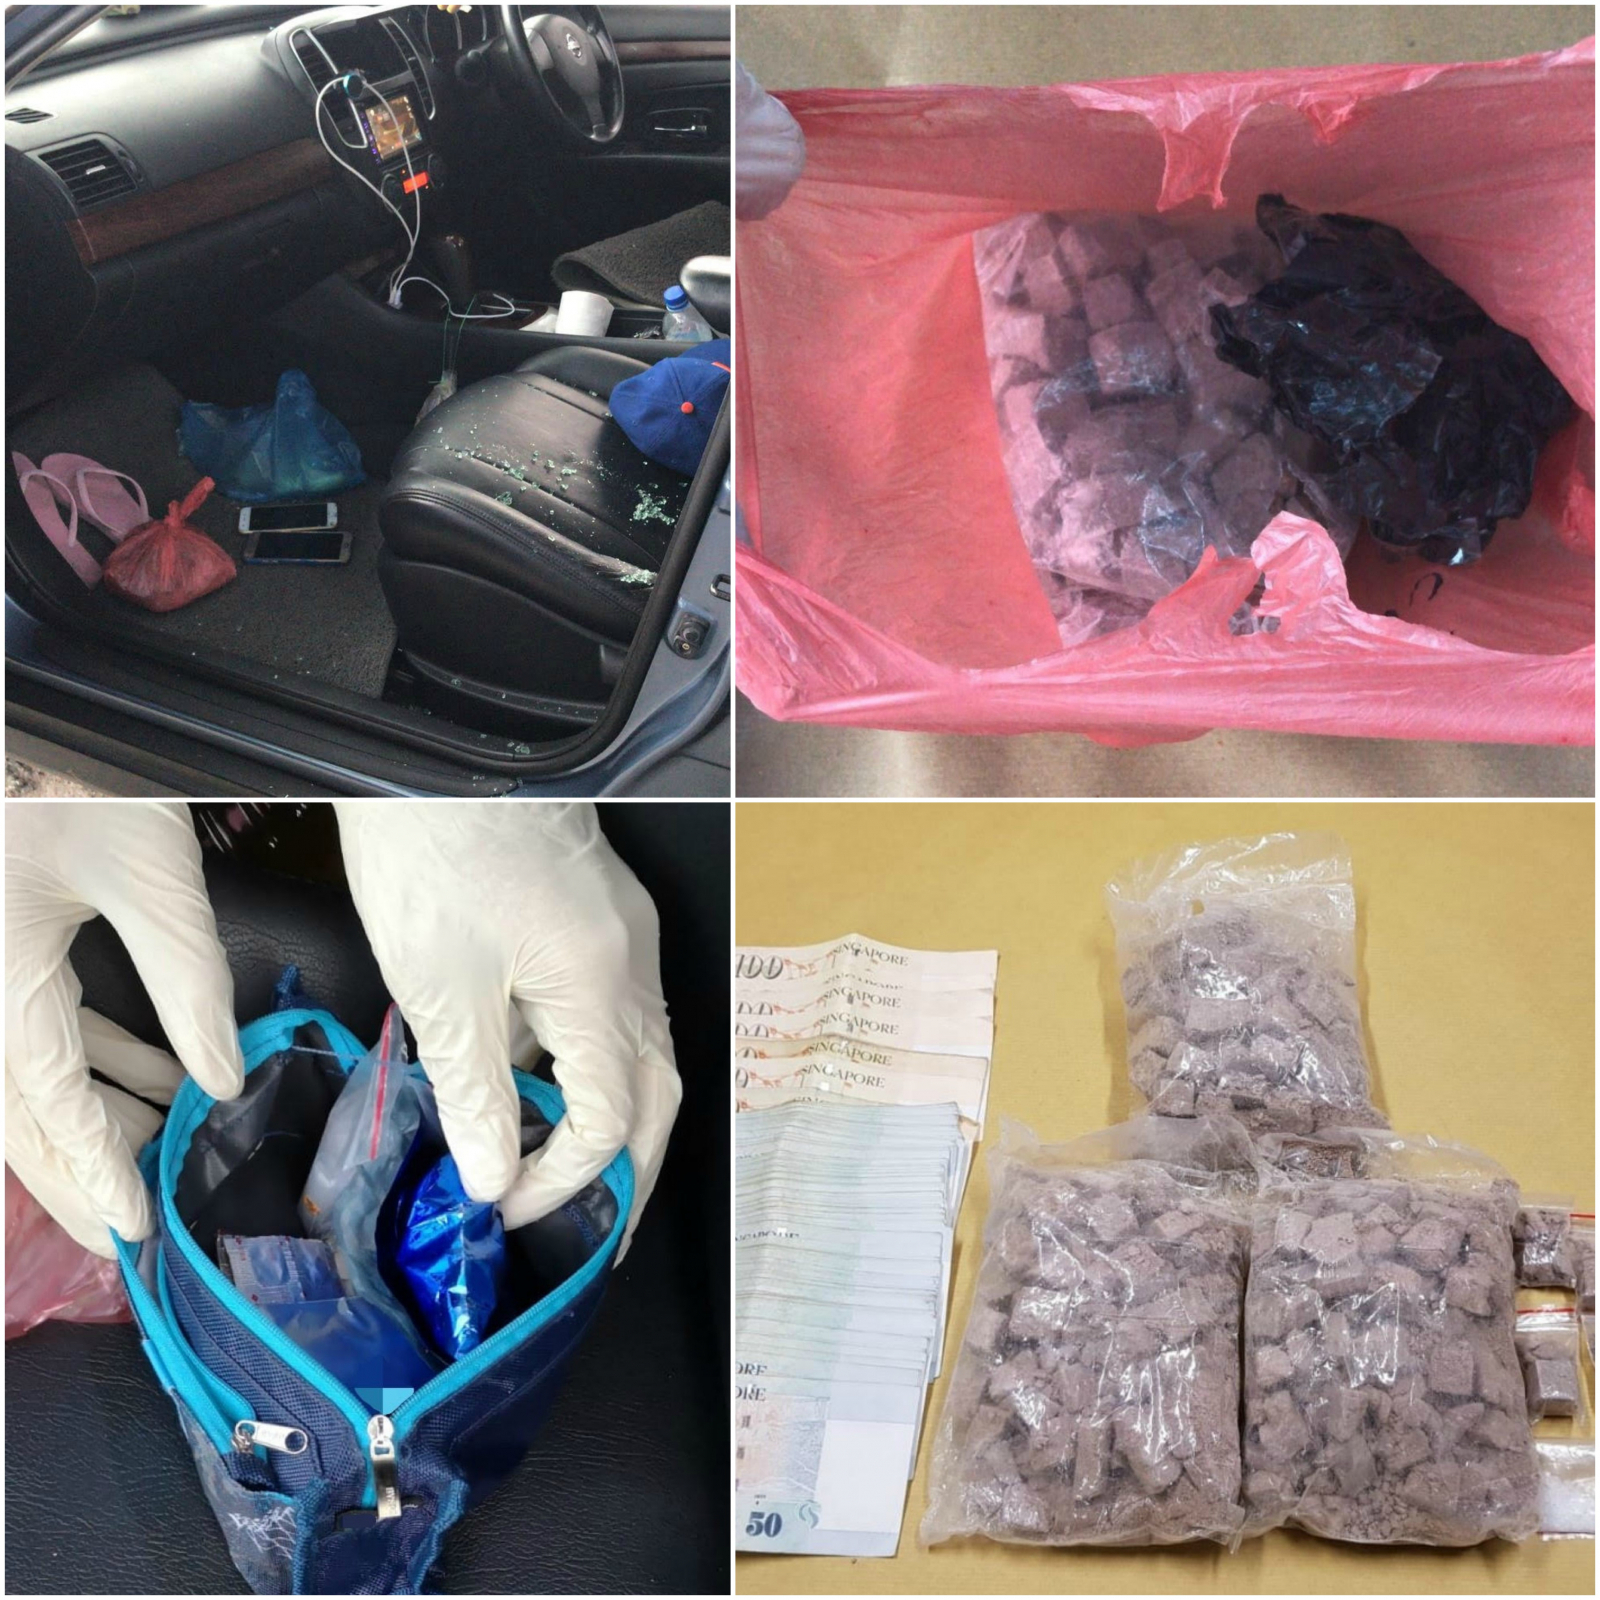 Singapore Cnb Arrest 6 Suspects Of Multi Drug Trafficking Seized Drugs From Vehicles And Residence